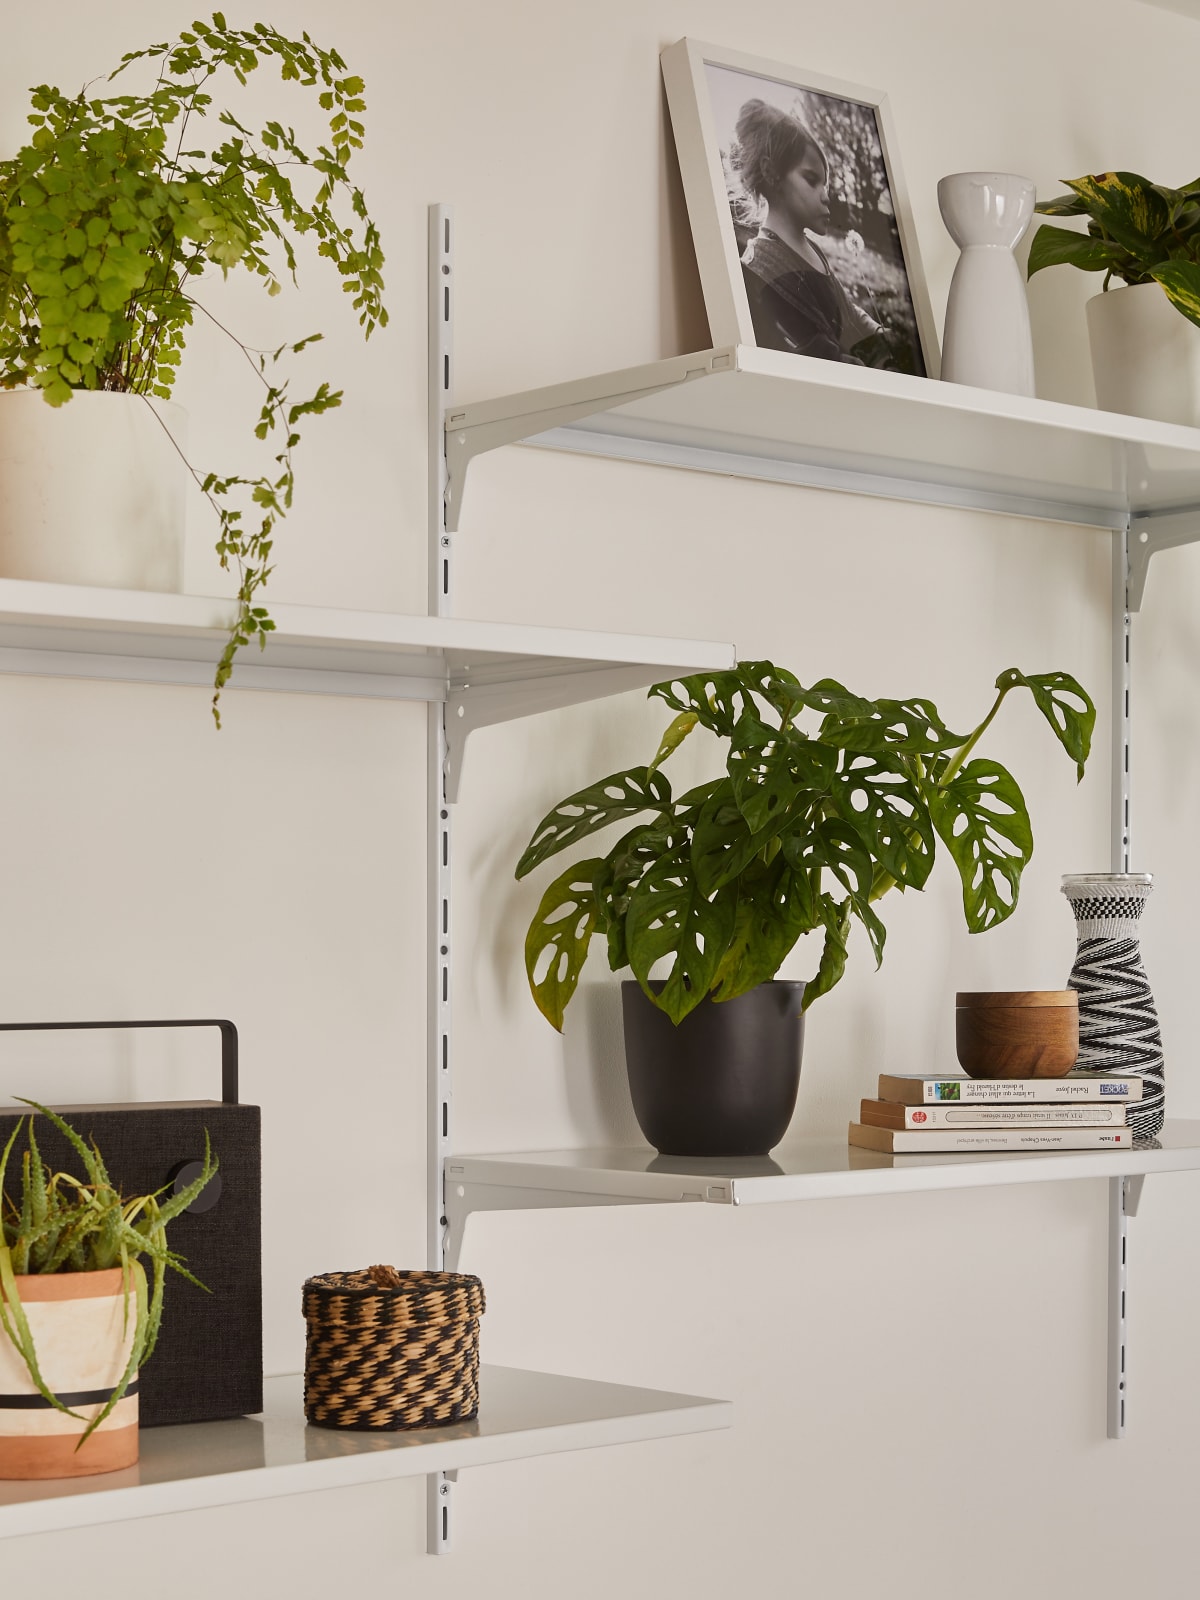 PACK 2 METAL SHELVES 80X30 CM WHITE SPACEO